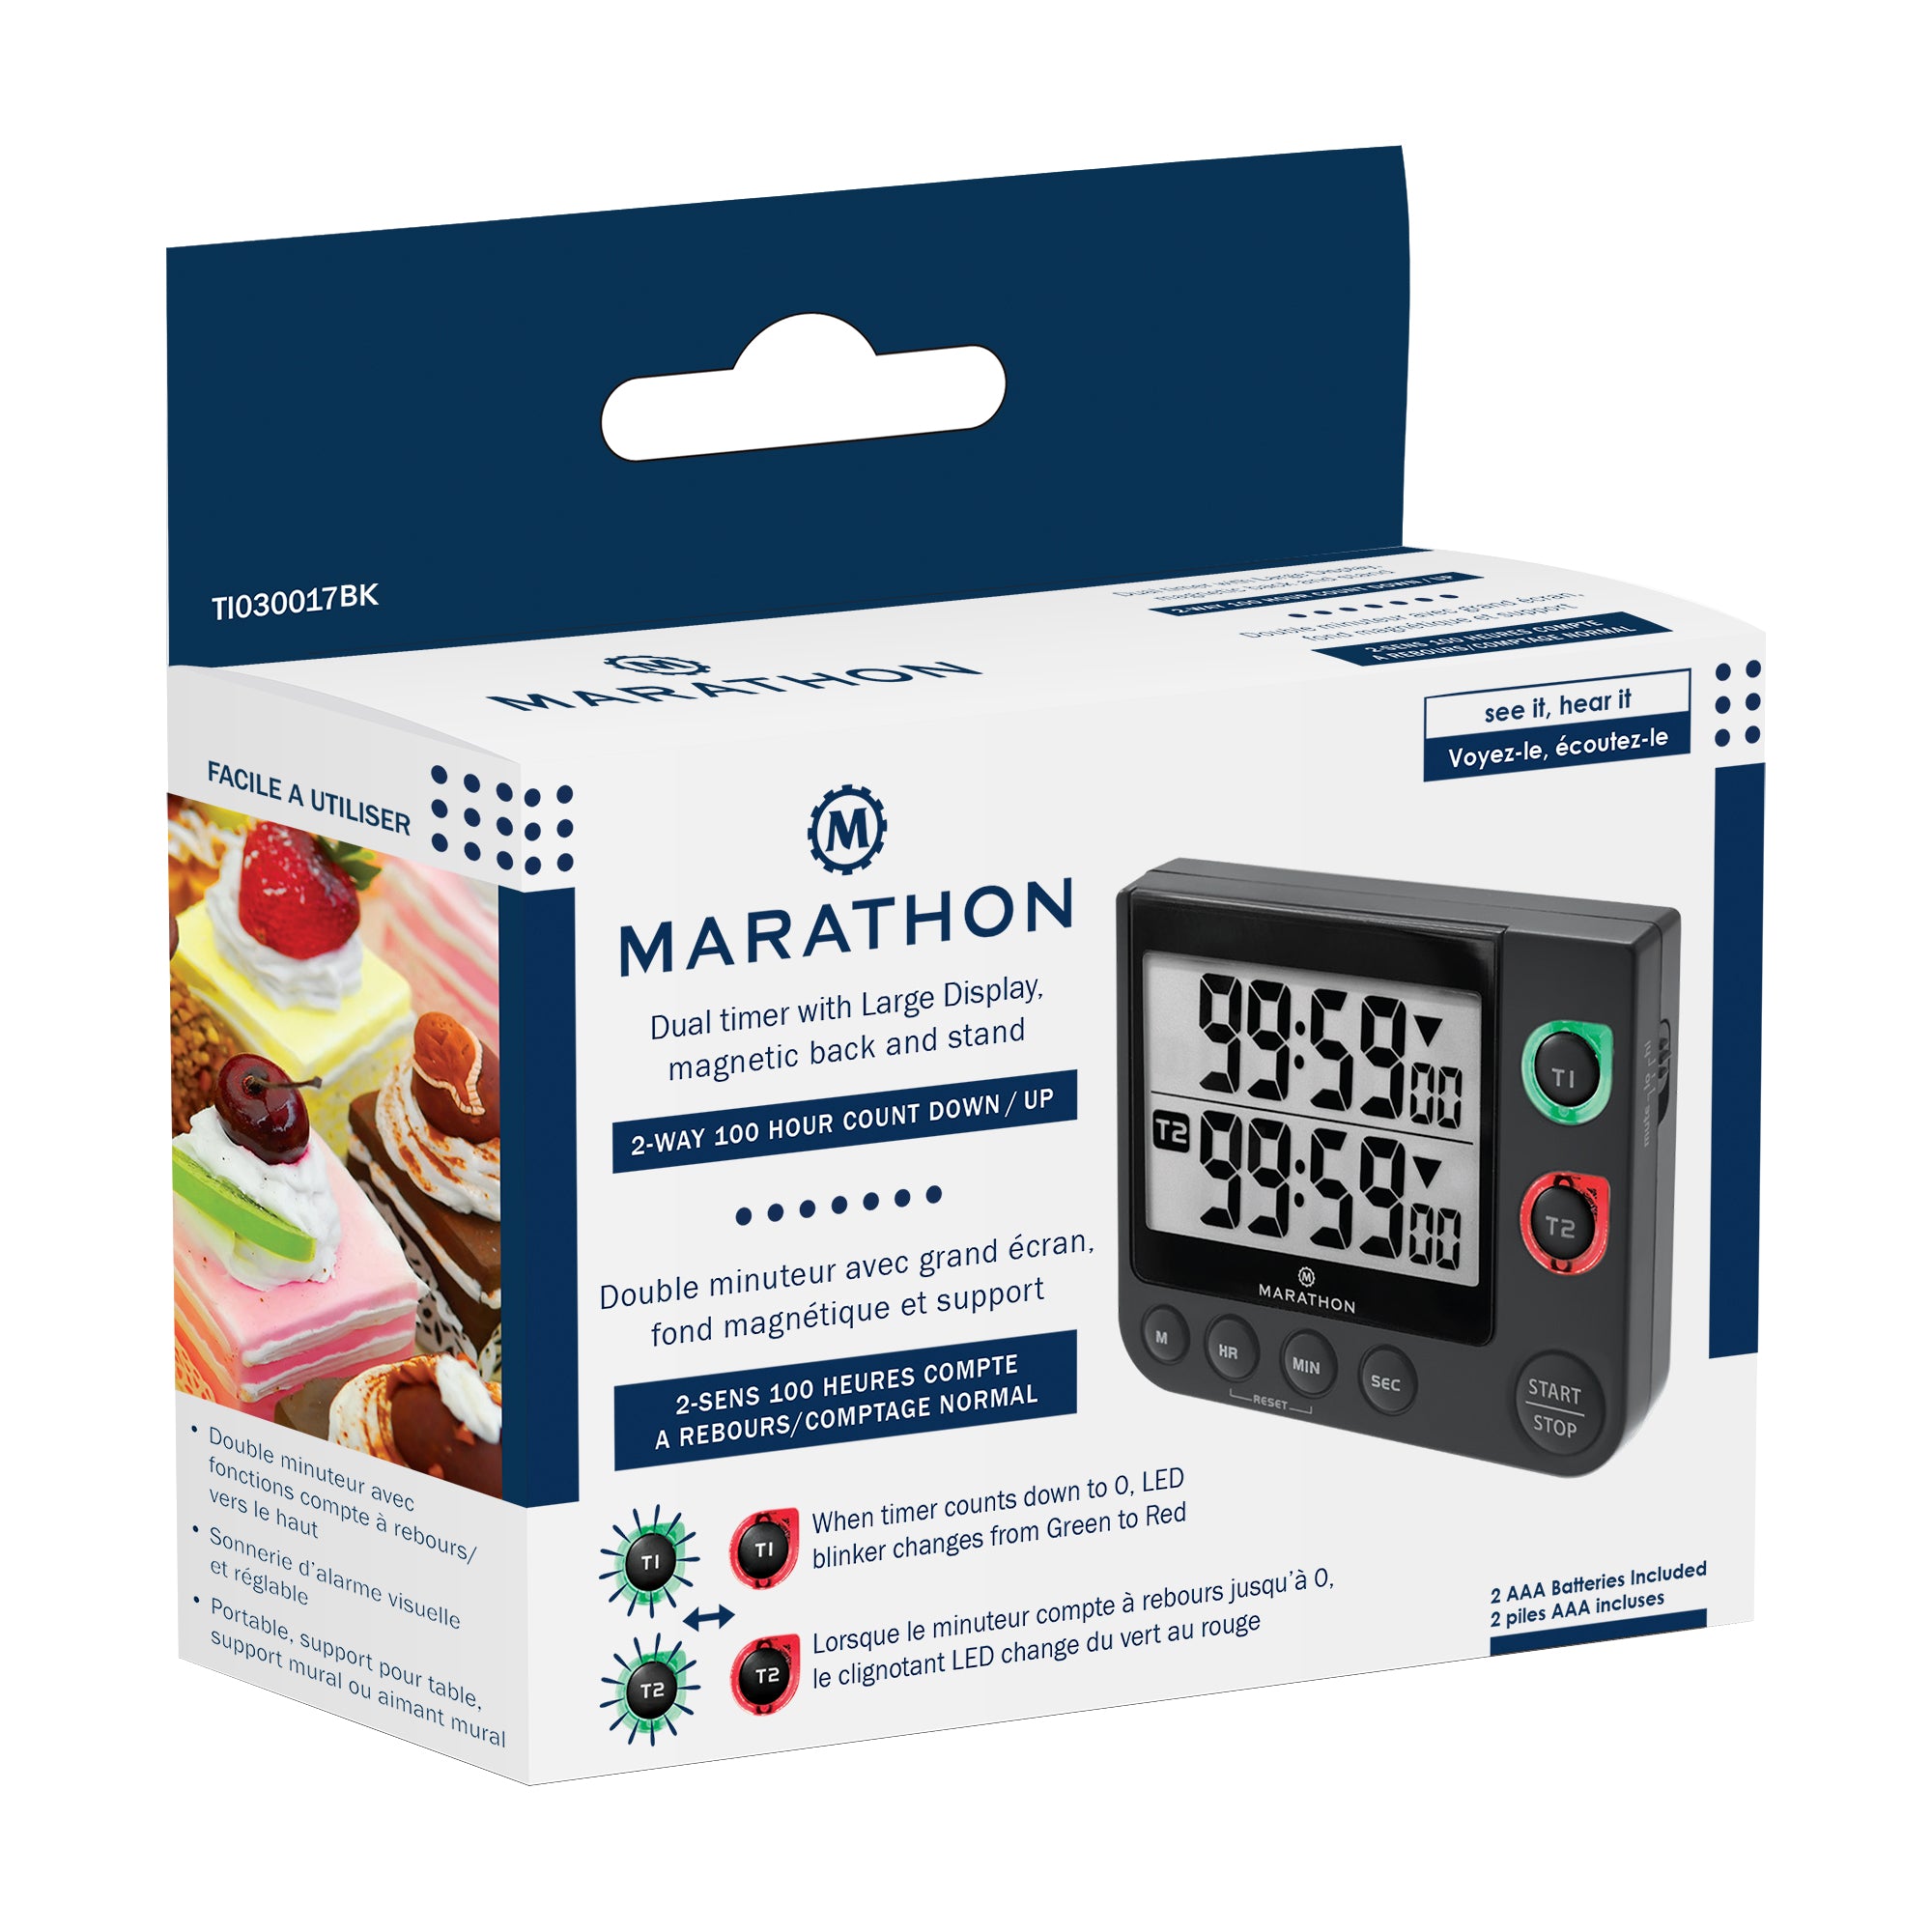 Marathon's Dual Timer with Large Display, Magnetic Back and Stand –  Marathon Watch